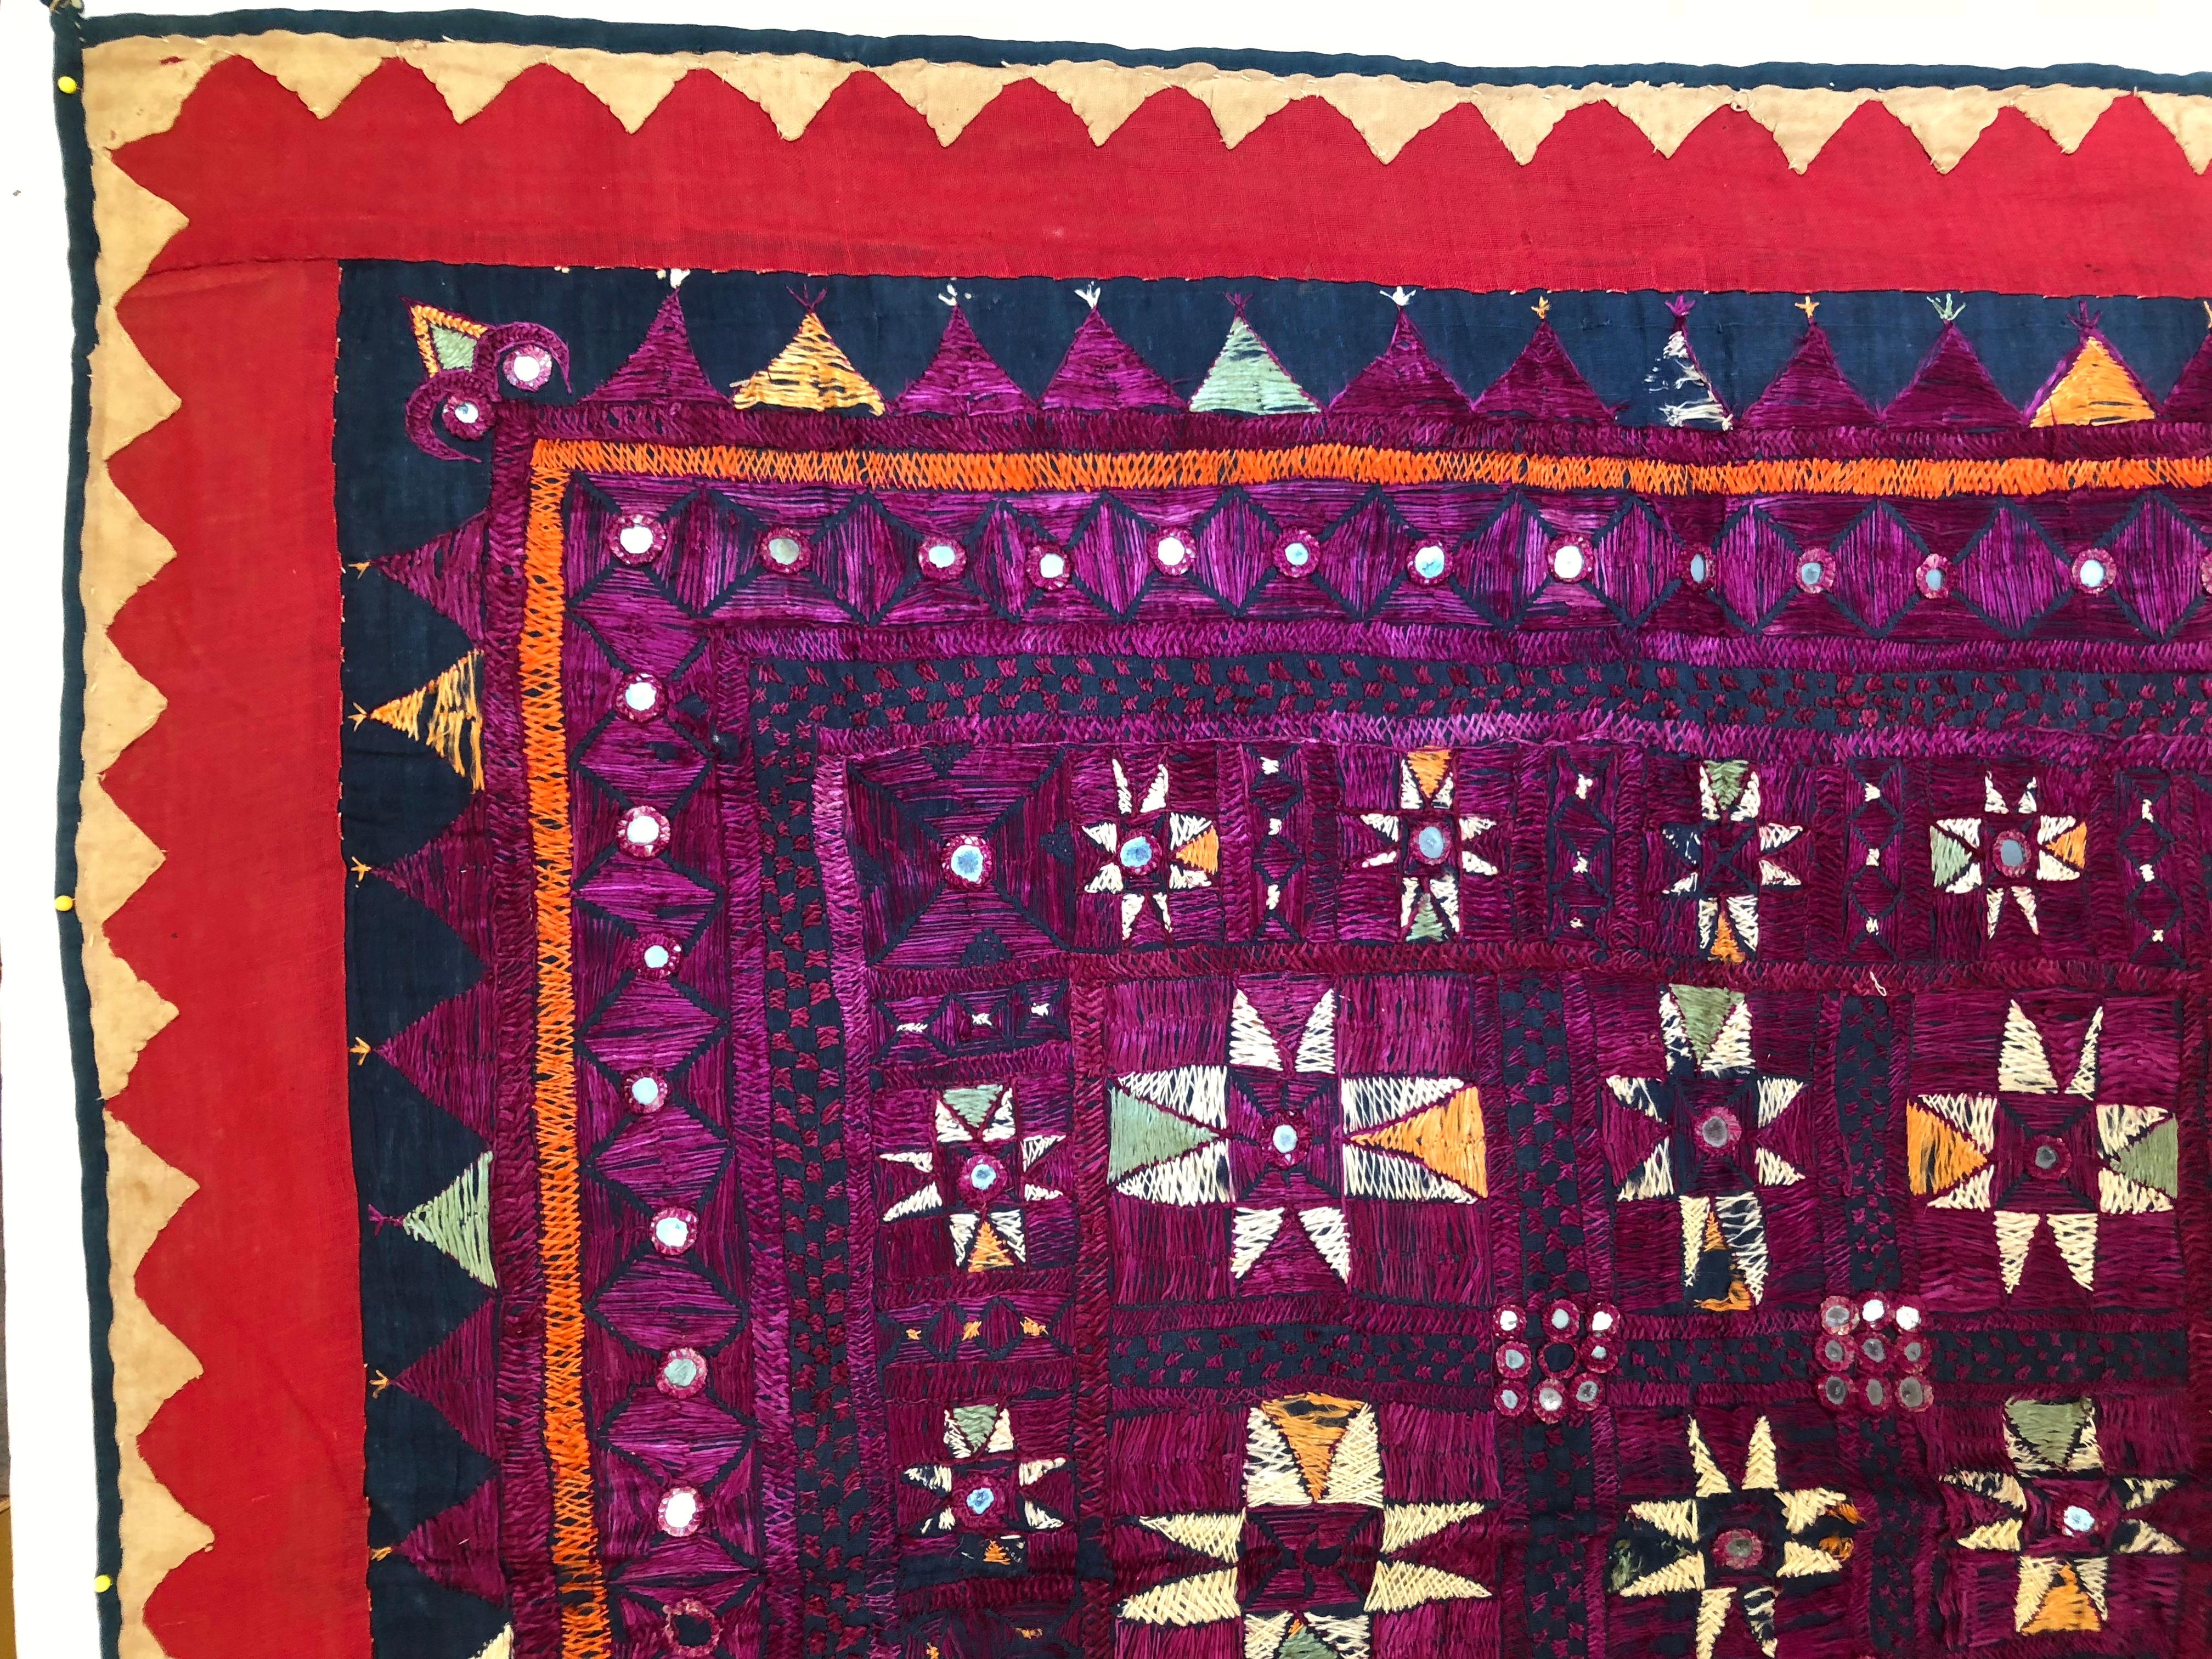 Vintage Banjara tribal Chaakla textile wall decor, India. Handwoven base cloth is embellished with hand embroidery work and mirrors, Textile art. This piece was made for personal use, not the tourist trade so it shows some thread loss and wear.